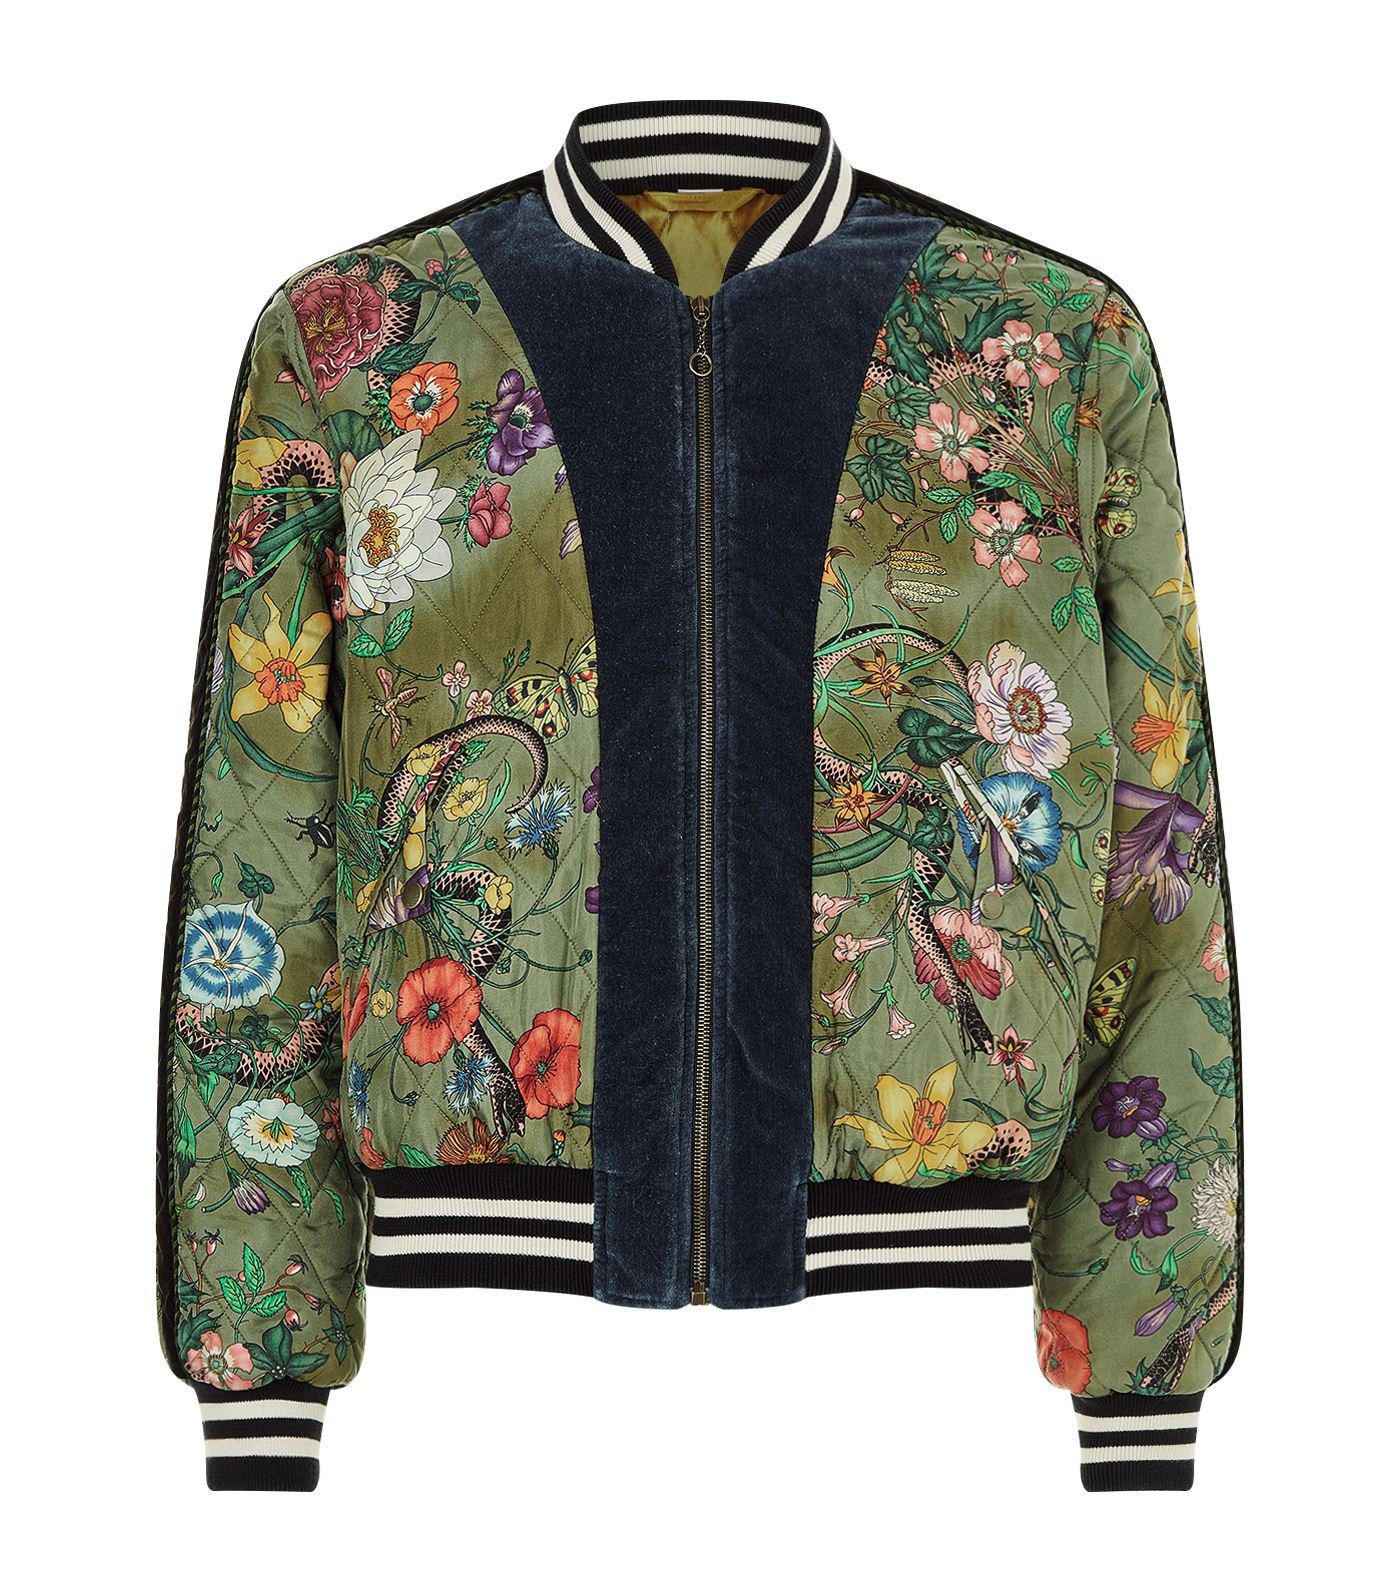 Gucci Silk Snake Print Bomber Jacket in Green for Men - Lyst